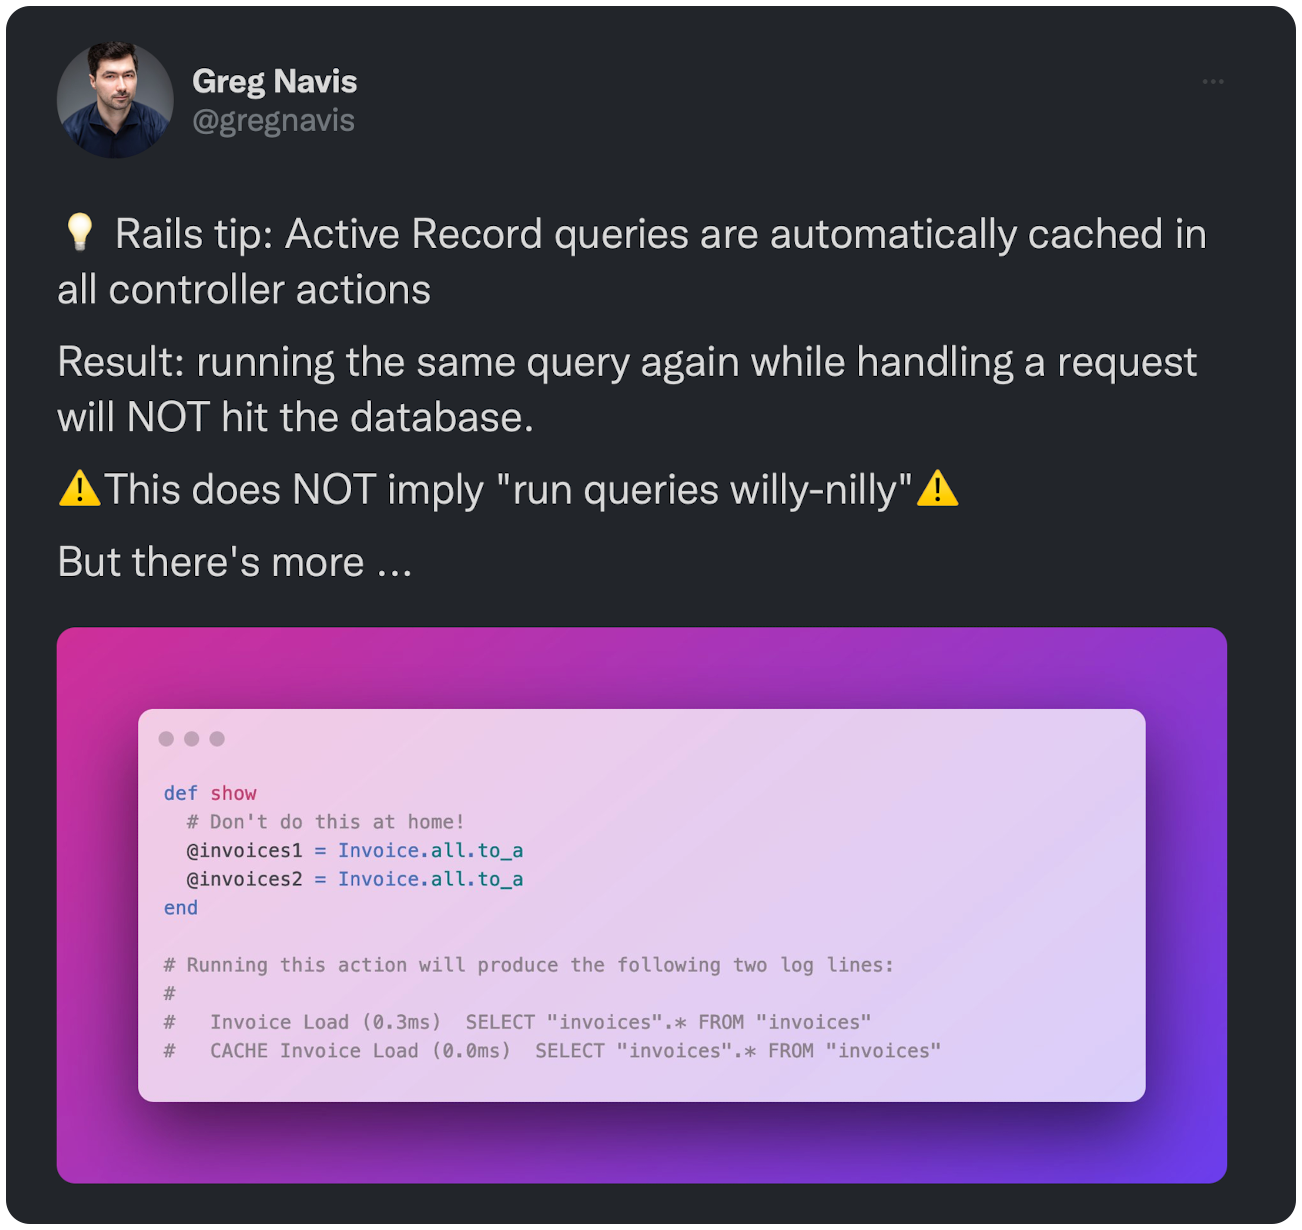 2022-11-04 12:00:09 UTC 💡 Rails tip: Active Record queries are automatically cached in all controller actions Result: running the same query again while handling a request will NOT hit the database. ⚠️This does NOT imply "run queries willy-nilly"⚠️ But there's more ... 